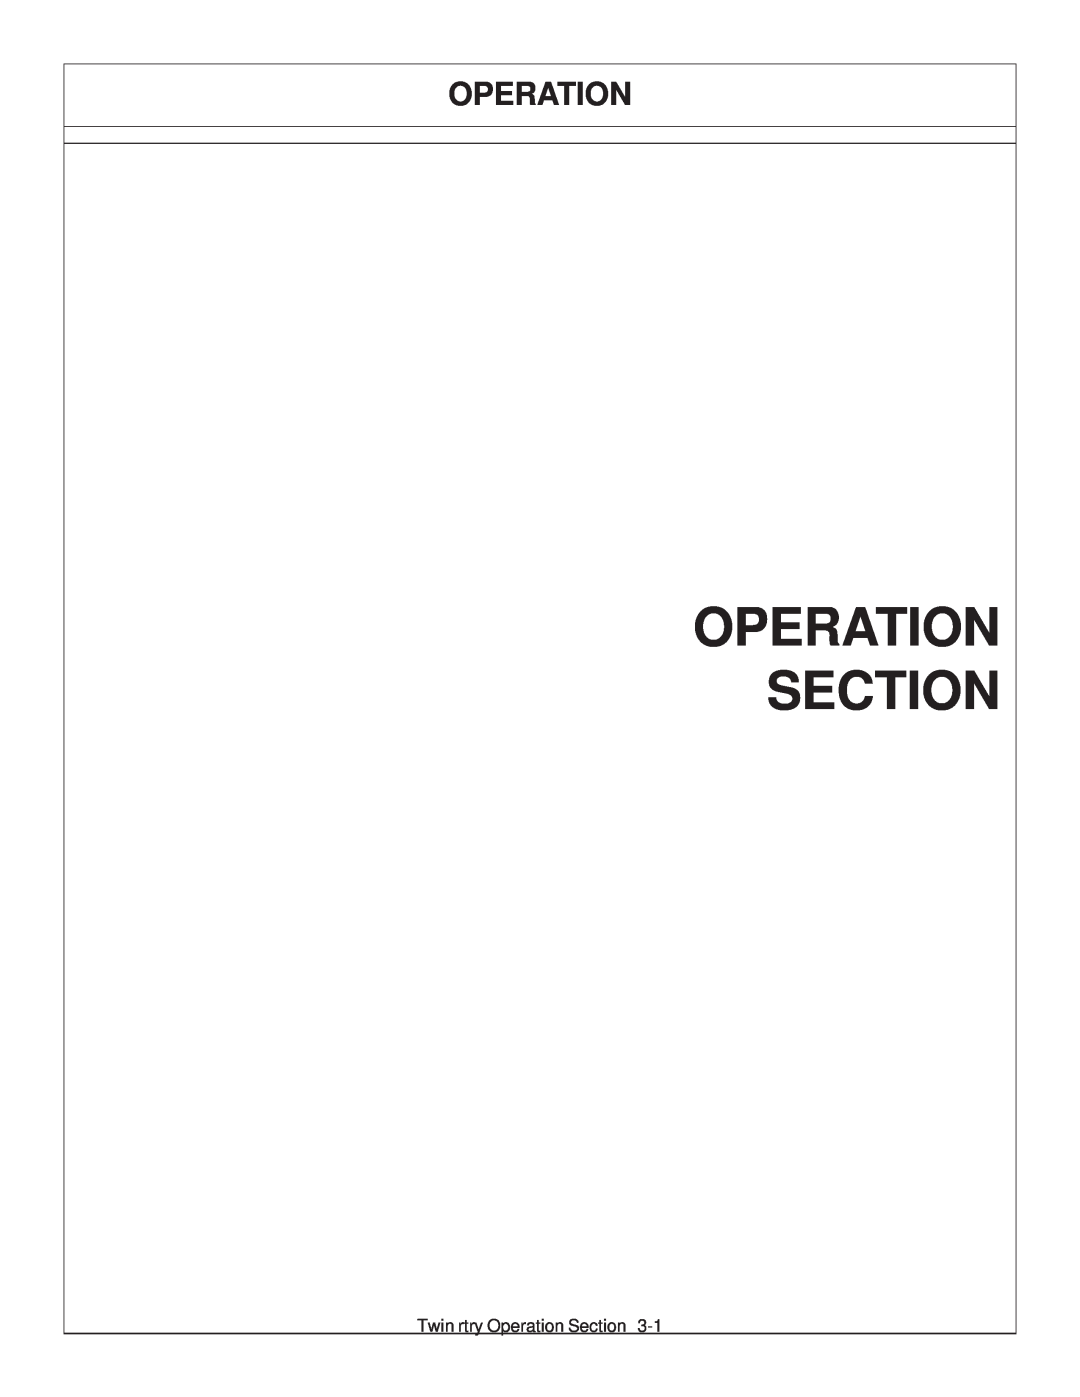 Tiger Products Co., Ltd 6020009 manual Operation Section 